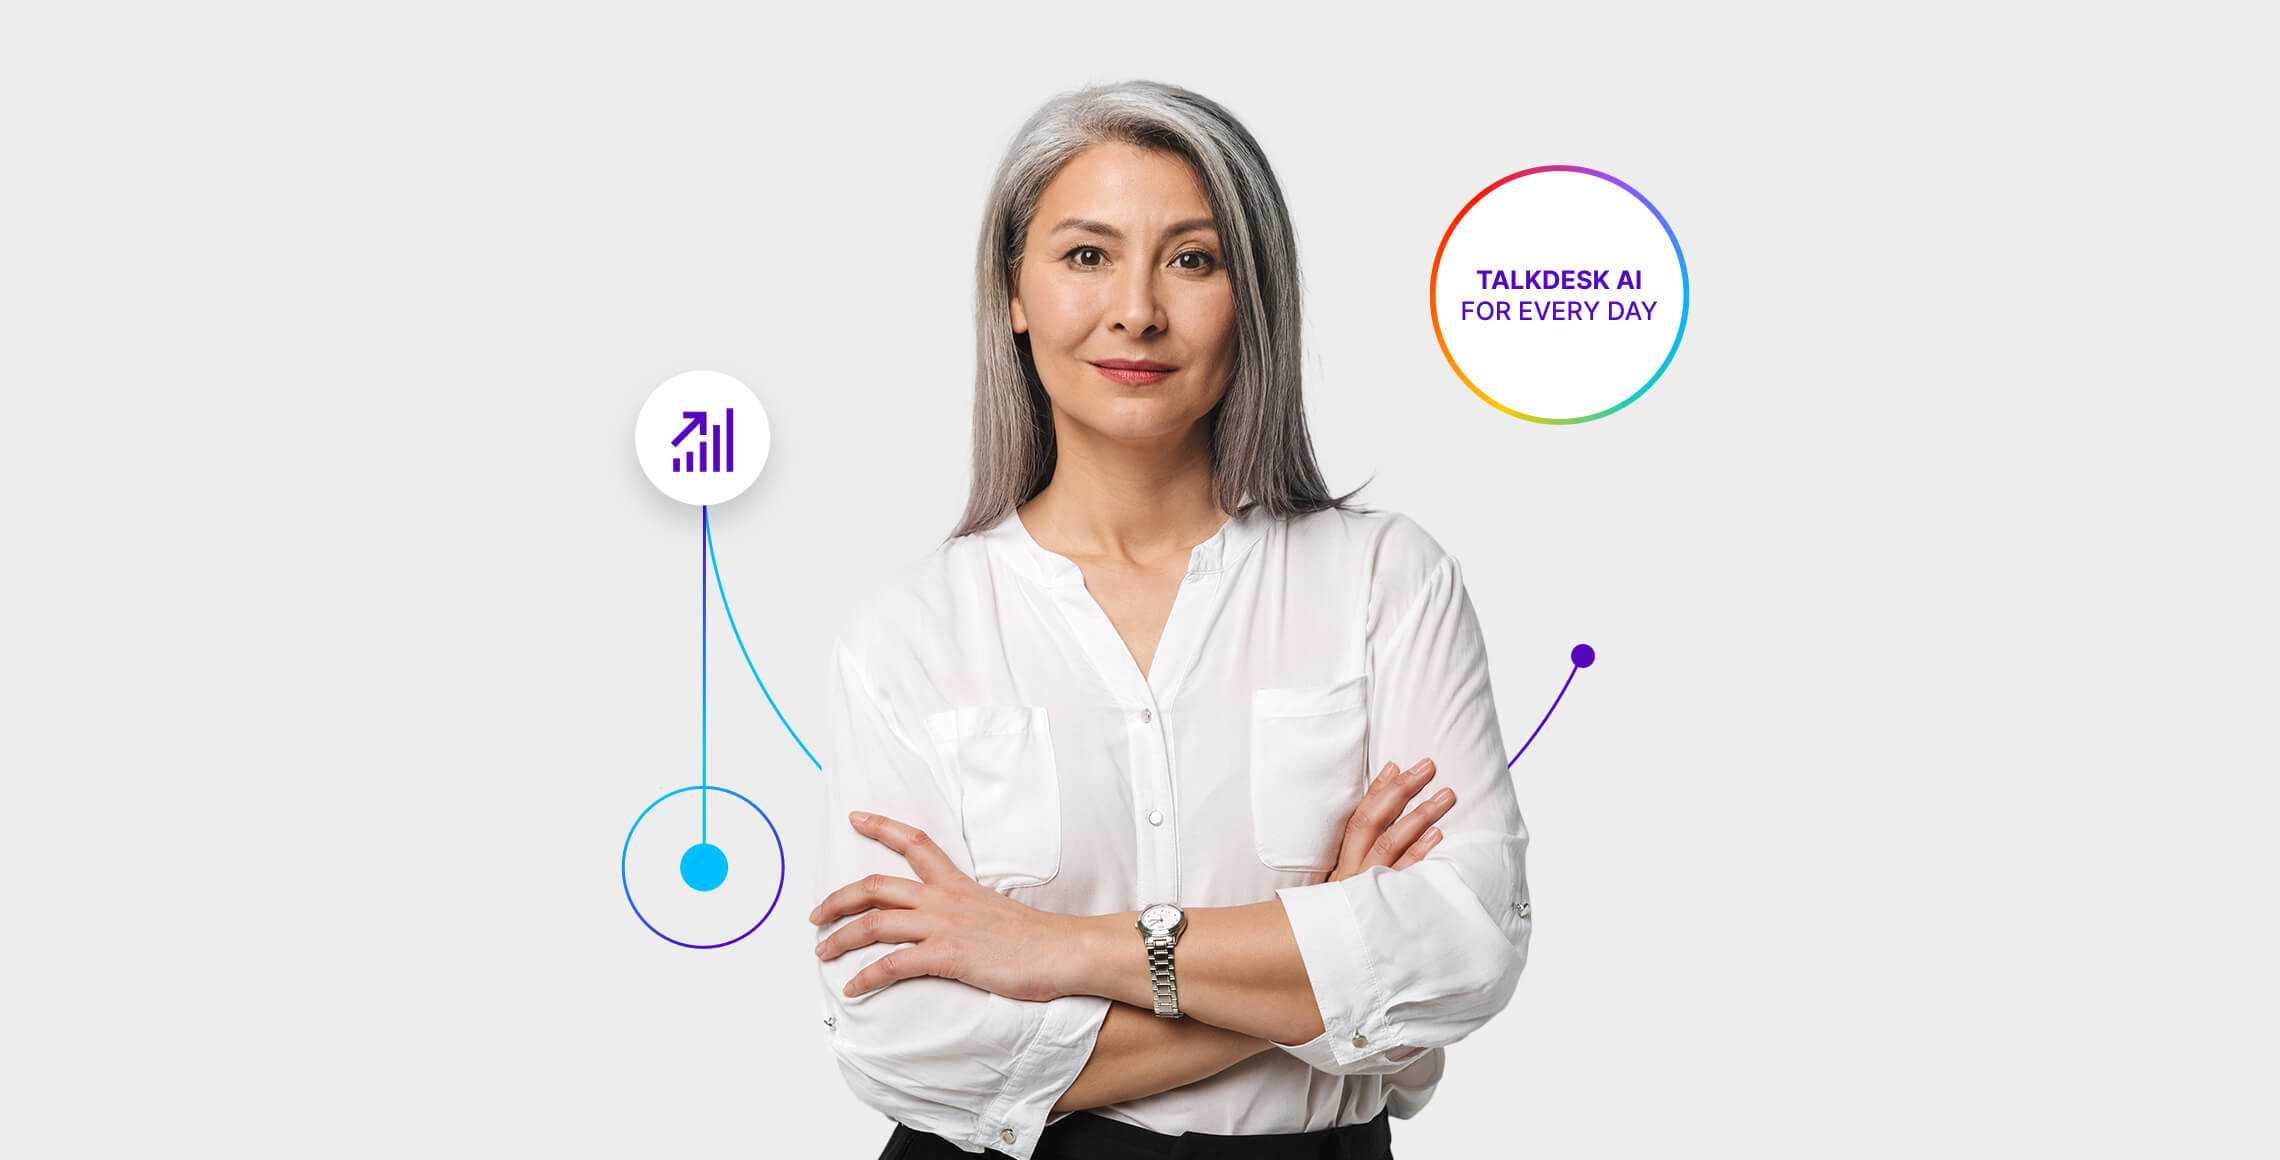 A woman smiles with crossed arms, surrounded by icons that represent the possibilities of AI for insurance and CX